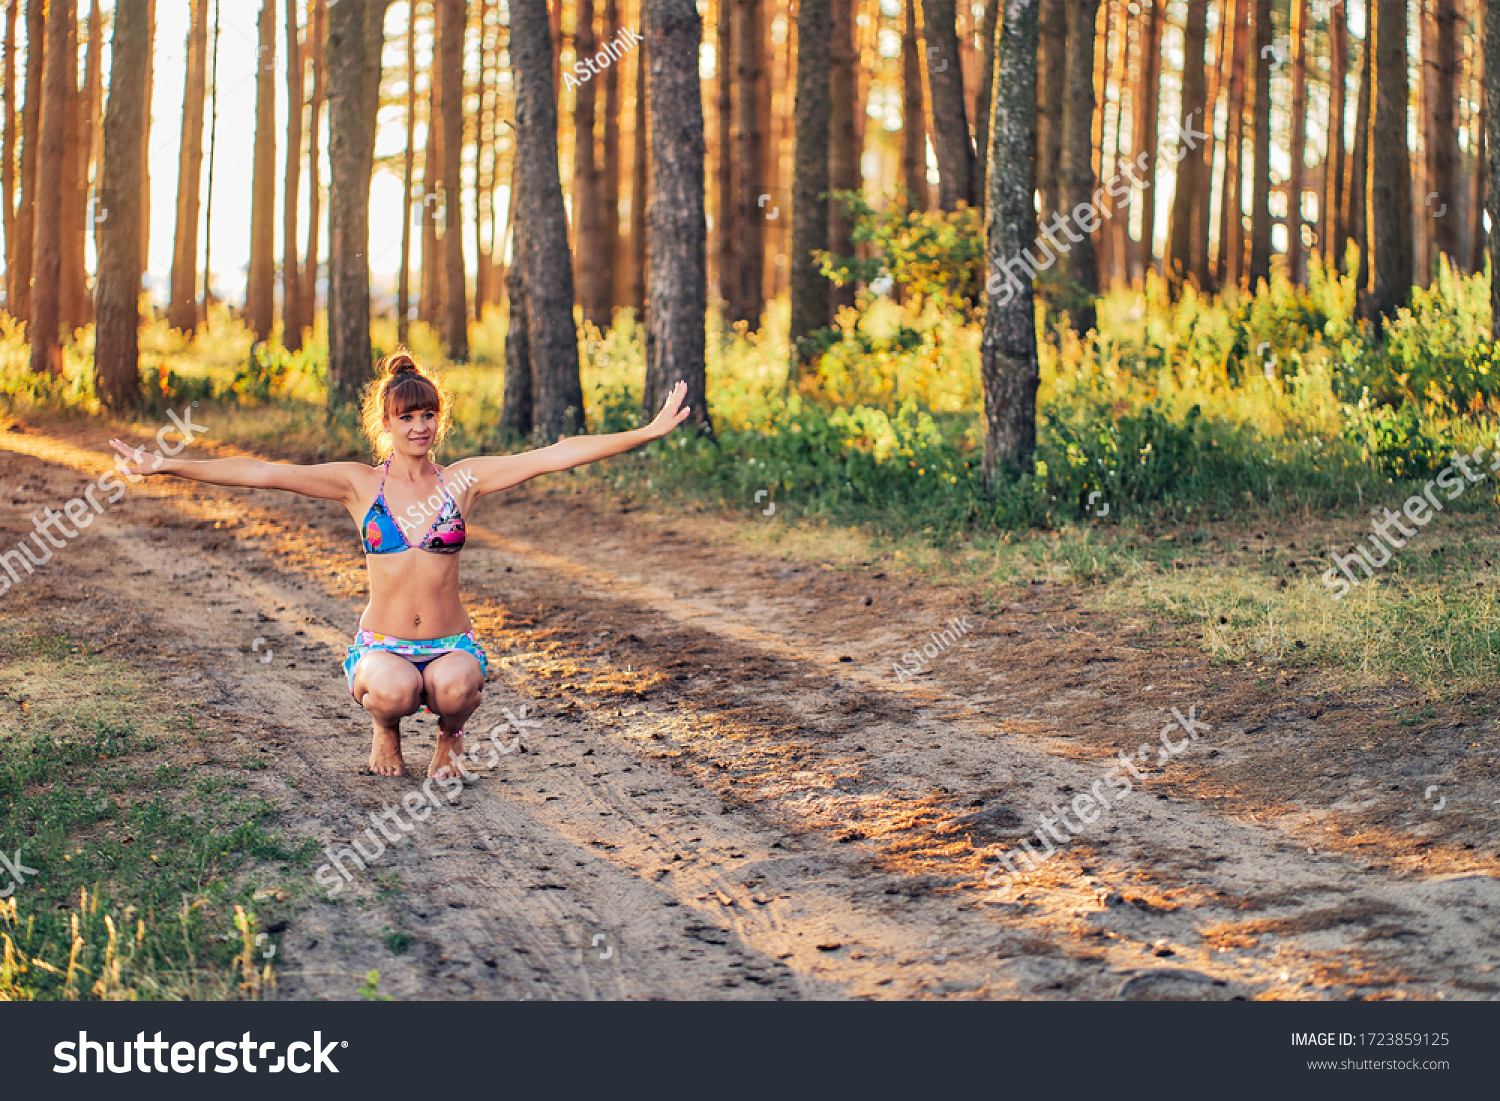 https://image.shutterstock.com/z/stock-photo-girl-in-a-bathing-suit-and-short-skirt-is-training-in-the-forest-1723859125.jpg